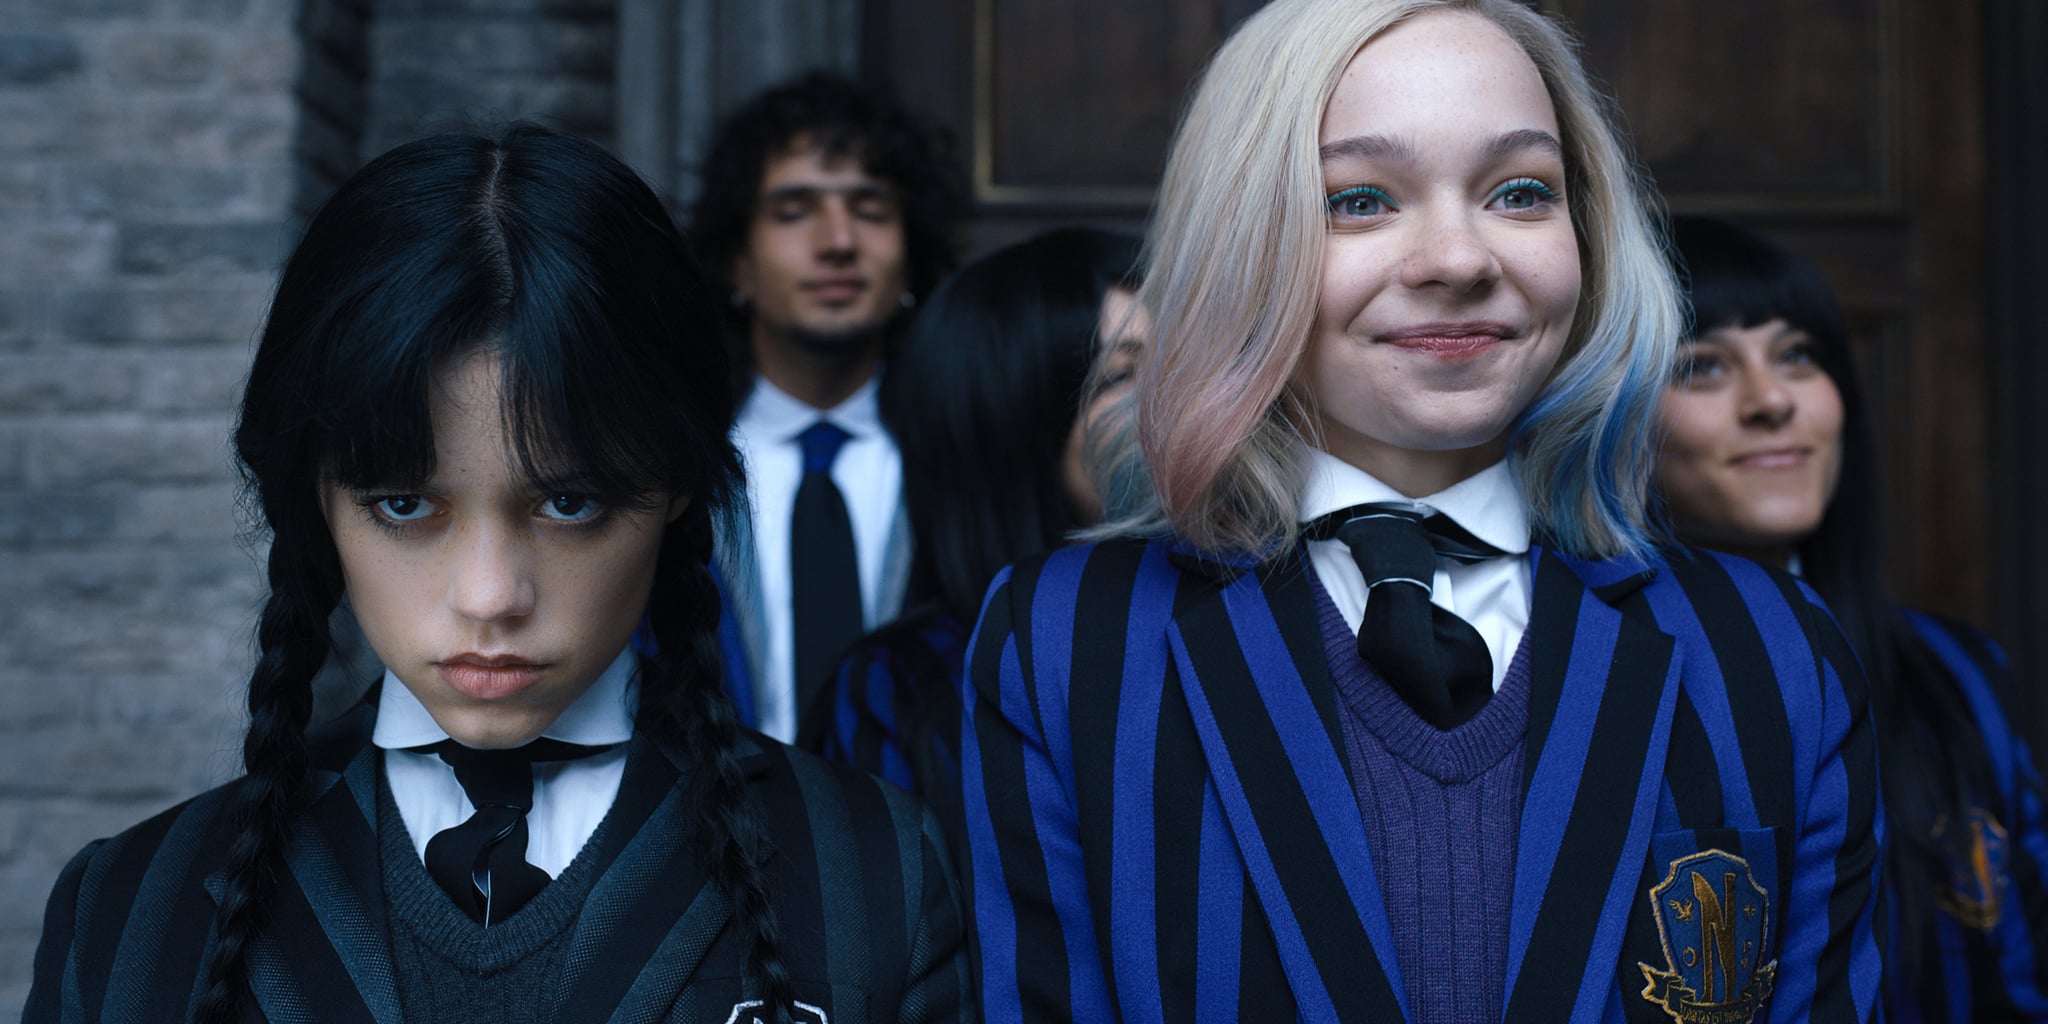 Wednesday. (L to R) Jenna Ortega as Wednesday Addams, Emma Myers as Enid Sinclair in episode 102 of Wednesday. Cr. Courtesy of Netflix  2022